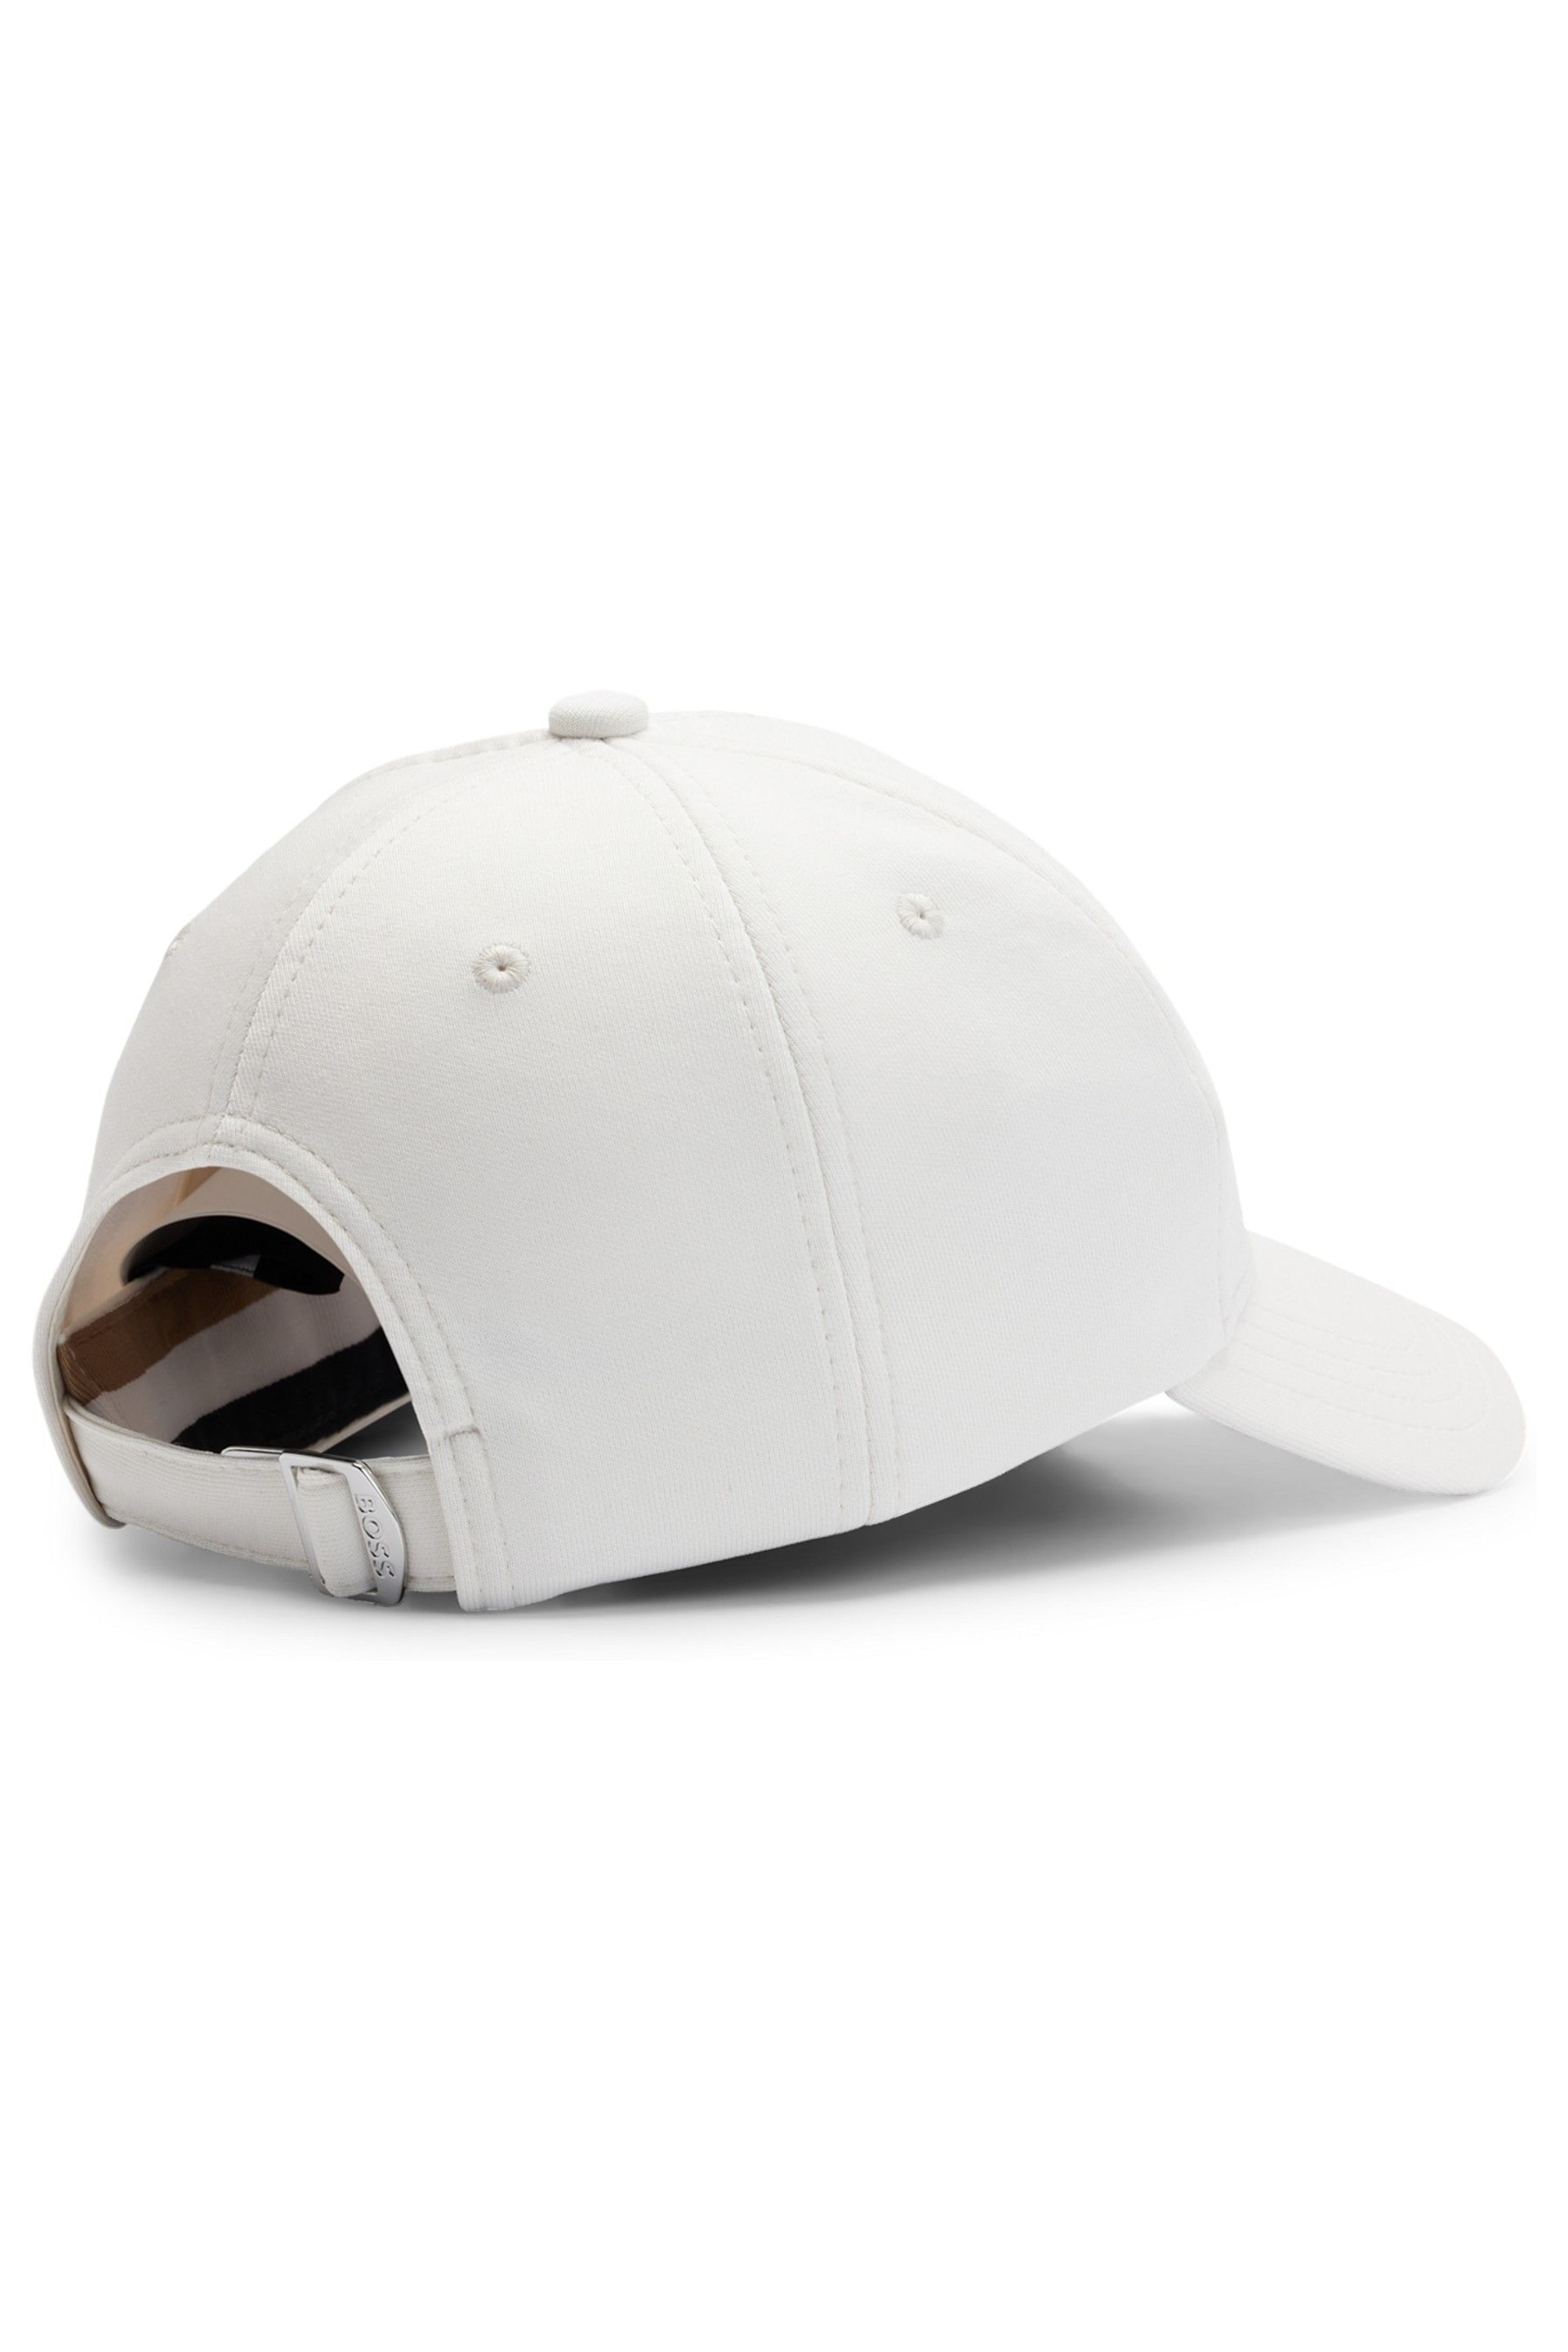 BOSS White Cotton-Blend Cap With Embroidered Double Monogram - Image 3 of 3